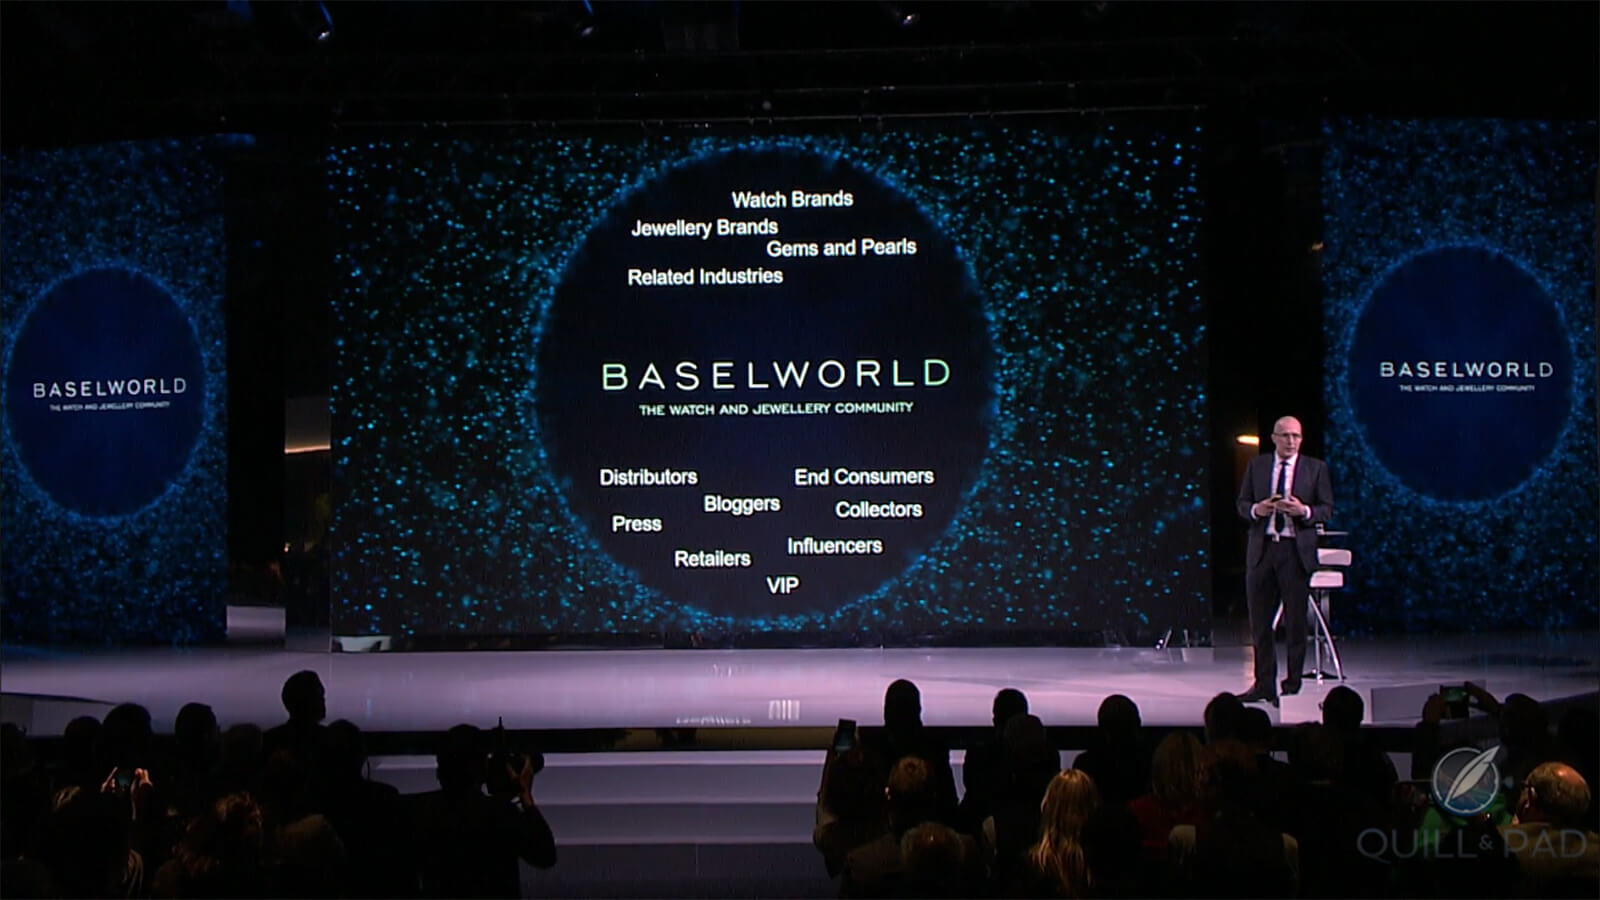 Baselworld's new director Michel Loris-Melikoff giving the closing presentation for Baselworld 2019